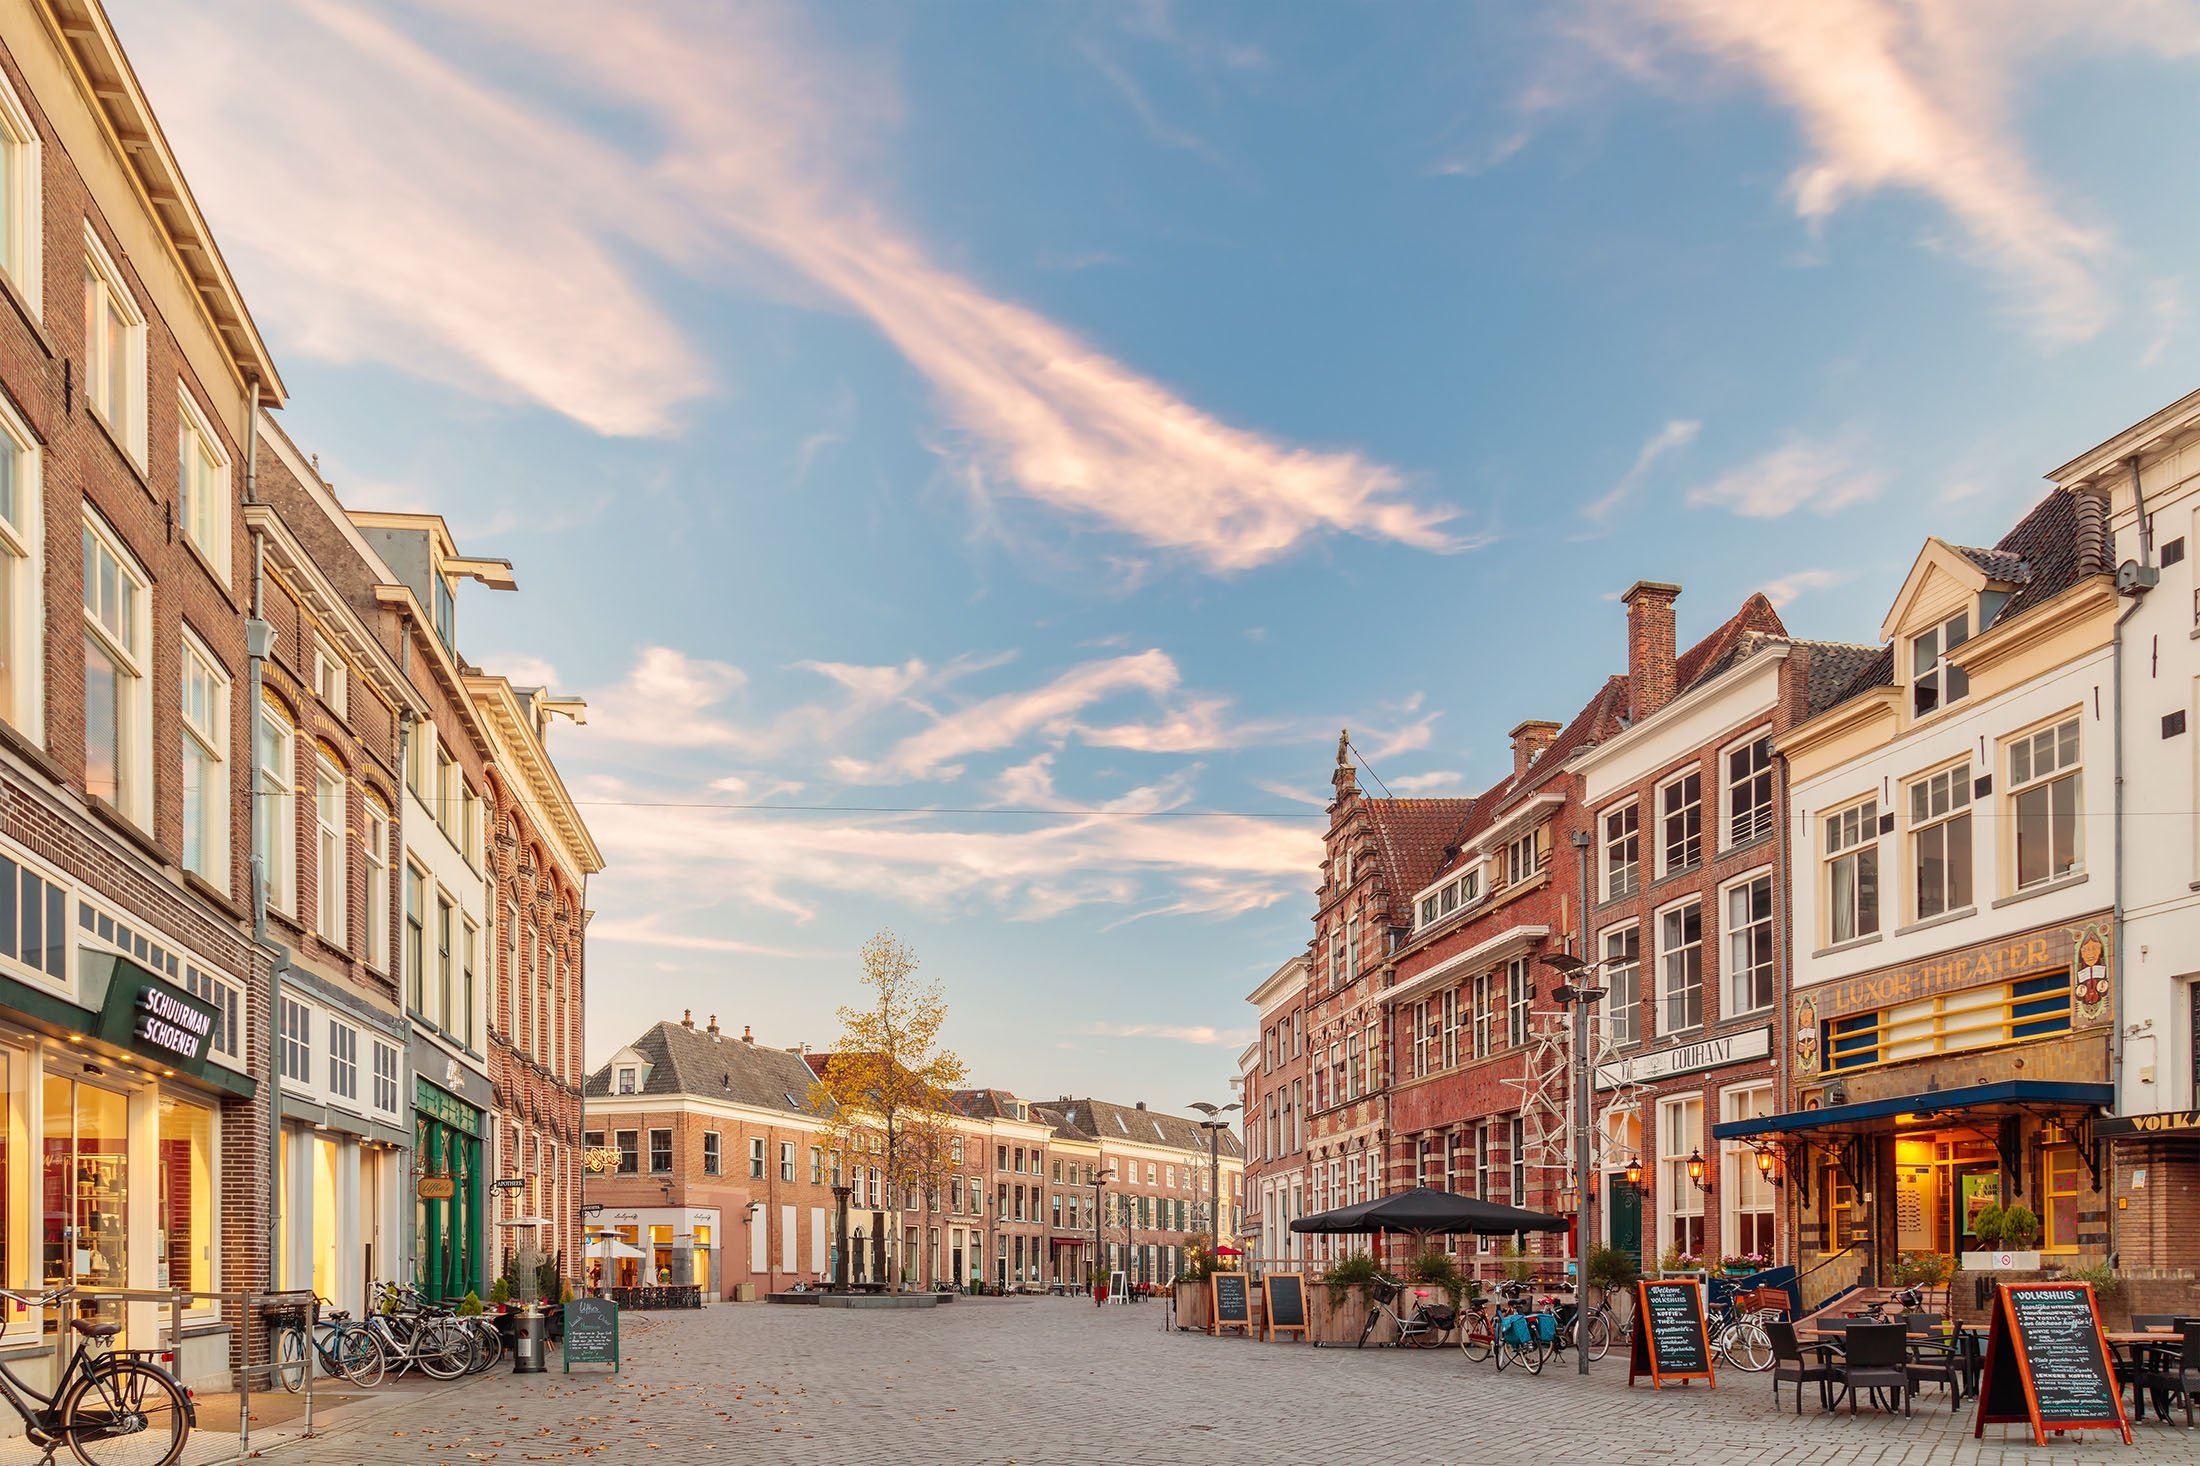 Restaurants on the Houtmarkt central square in the Dutch city of Zutphen, the Netherlands. (Shutterstock Photo)